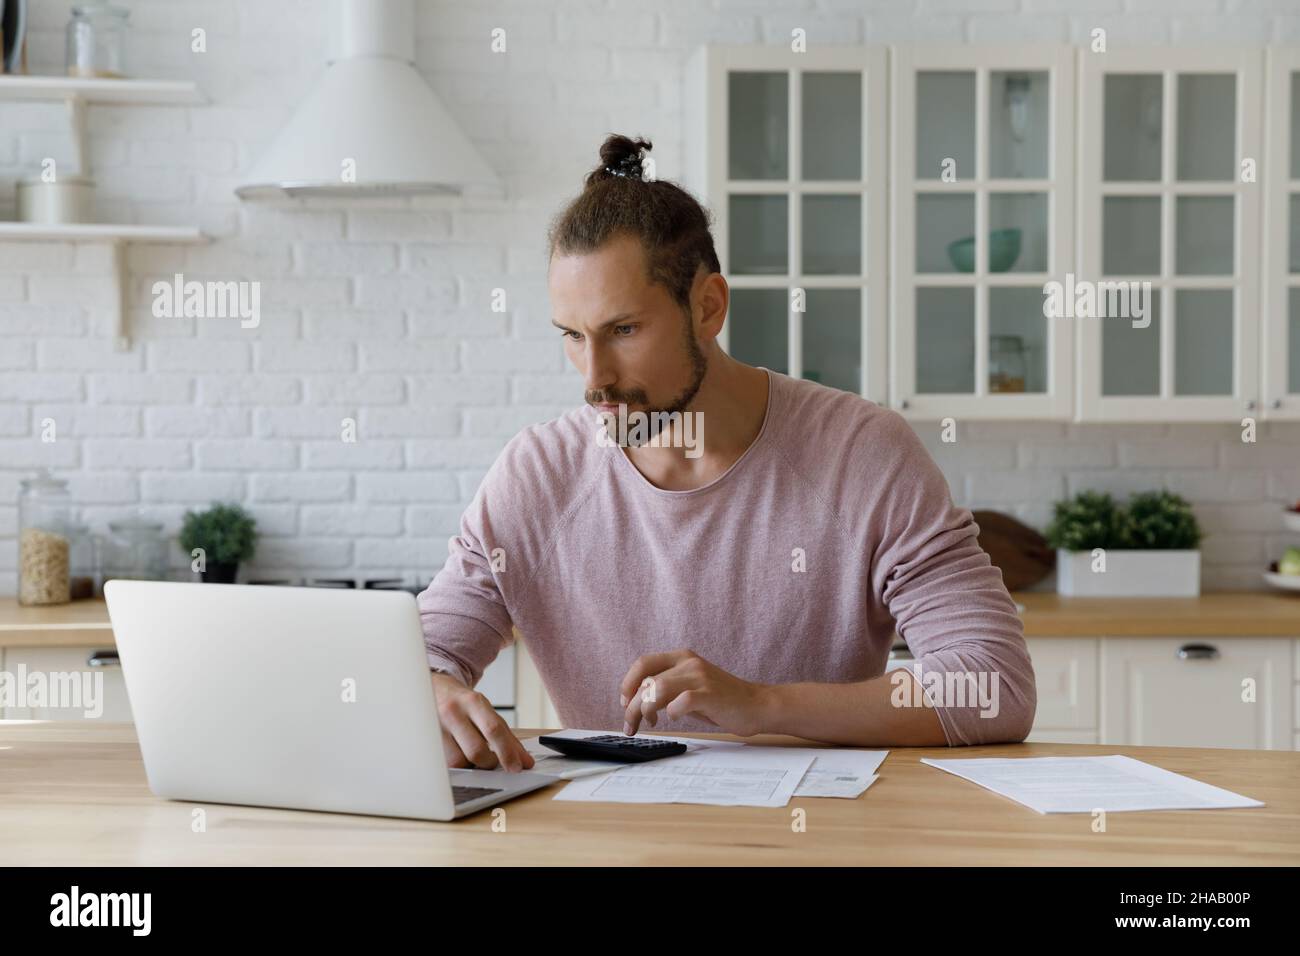 Focused bearded young hipster tenant man calculating mortgage fees Stock Photo